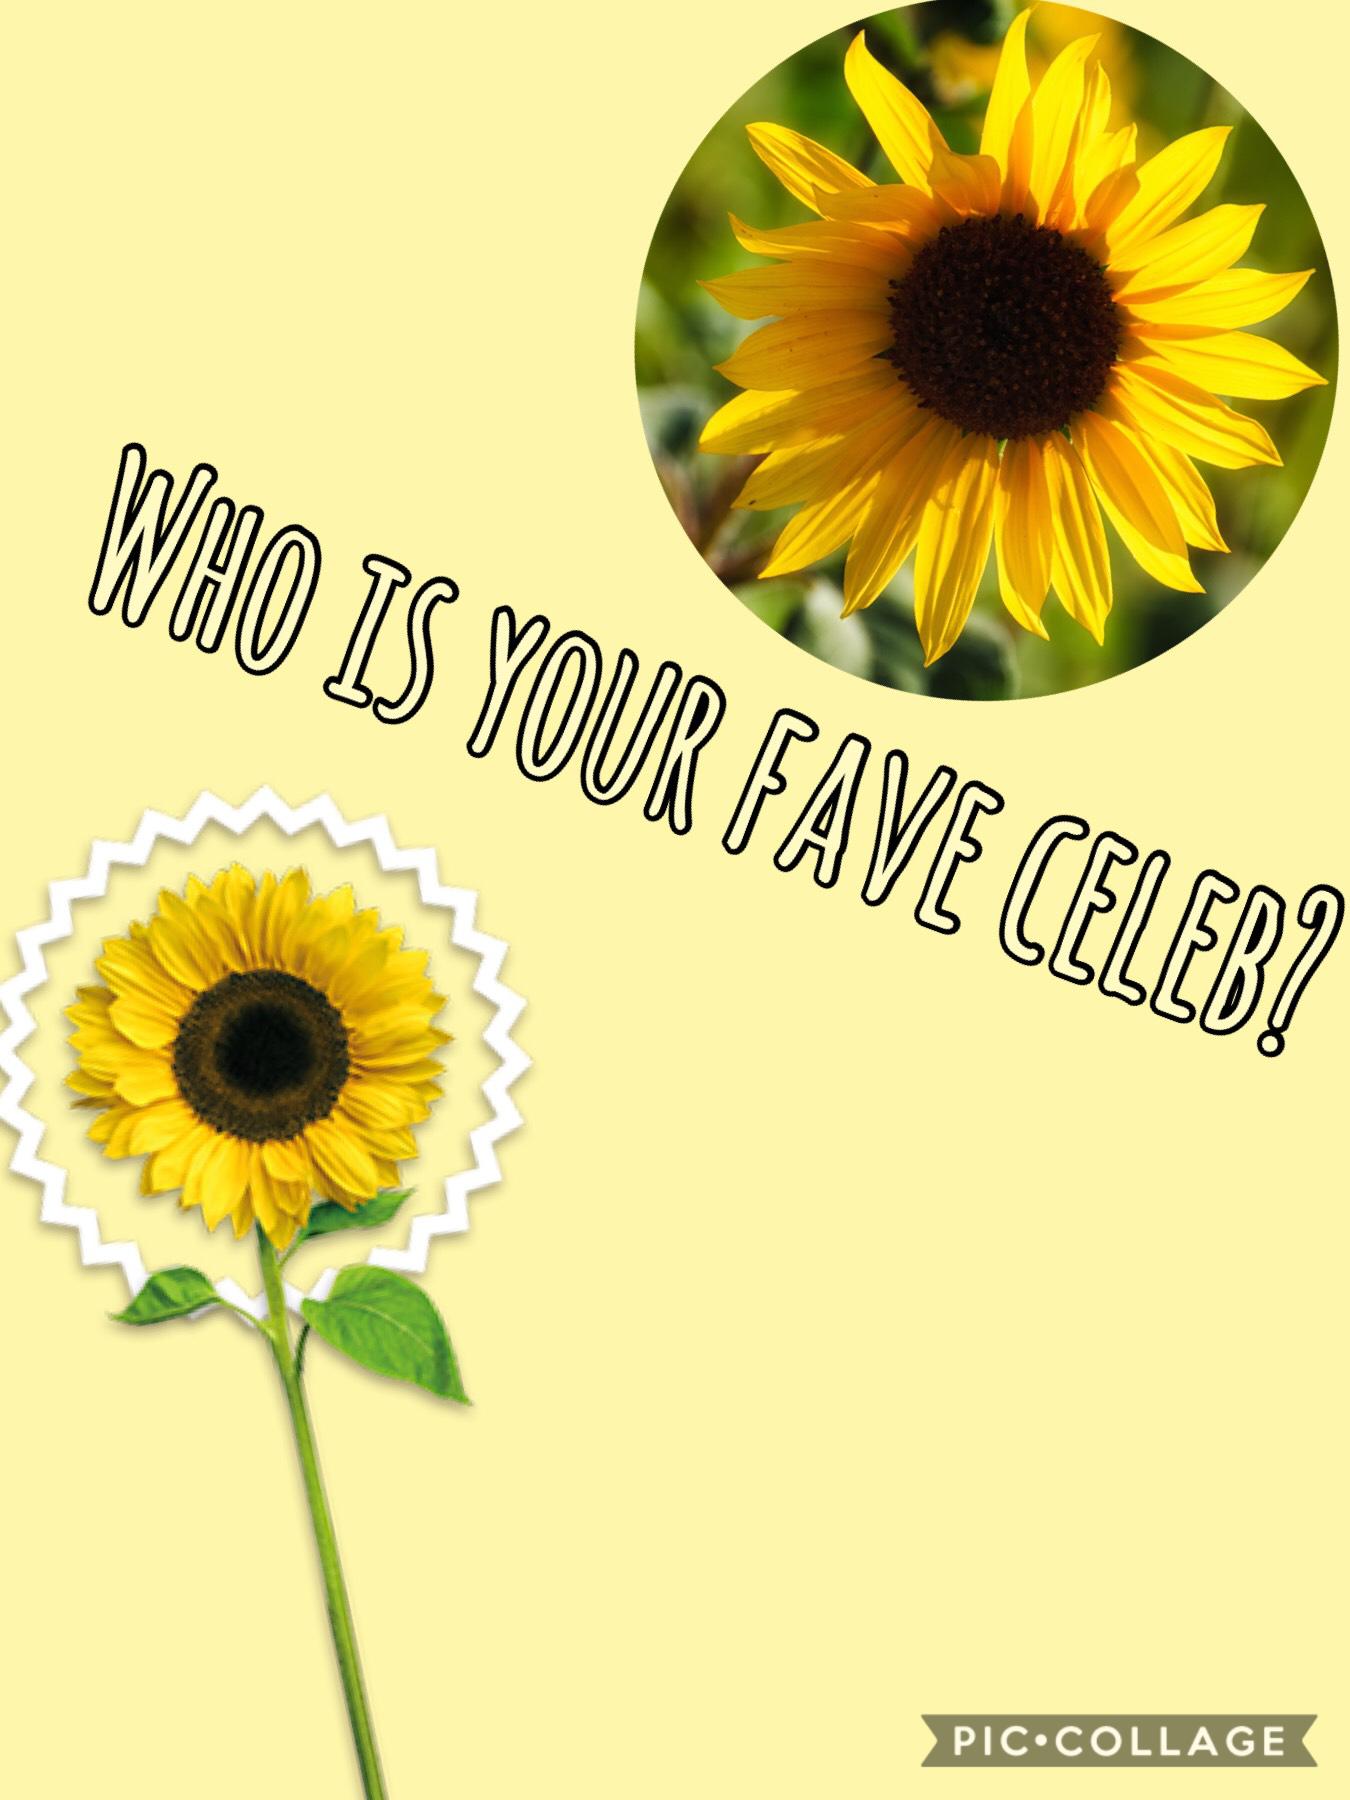 Who’s your fave celeb?